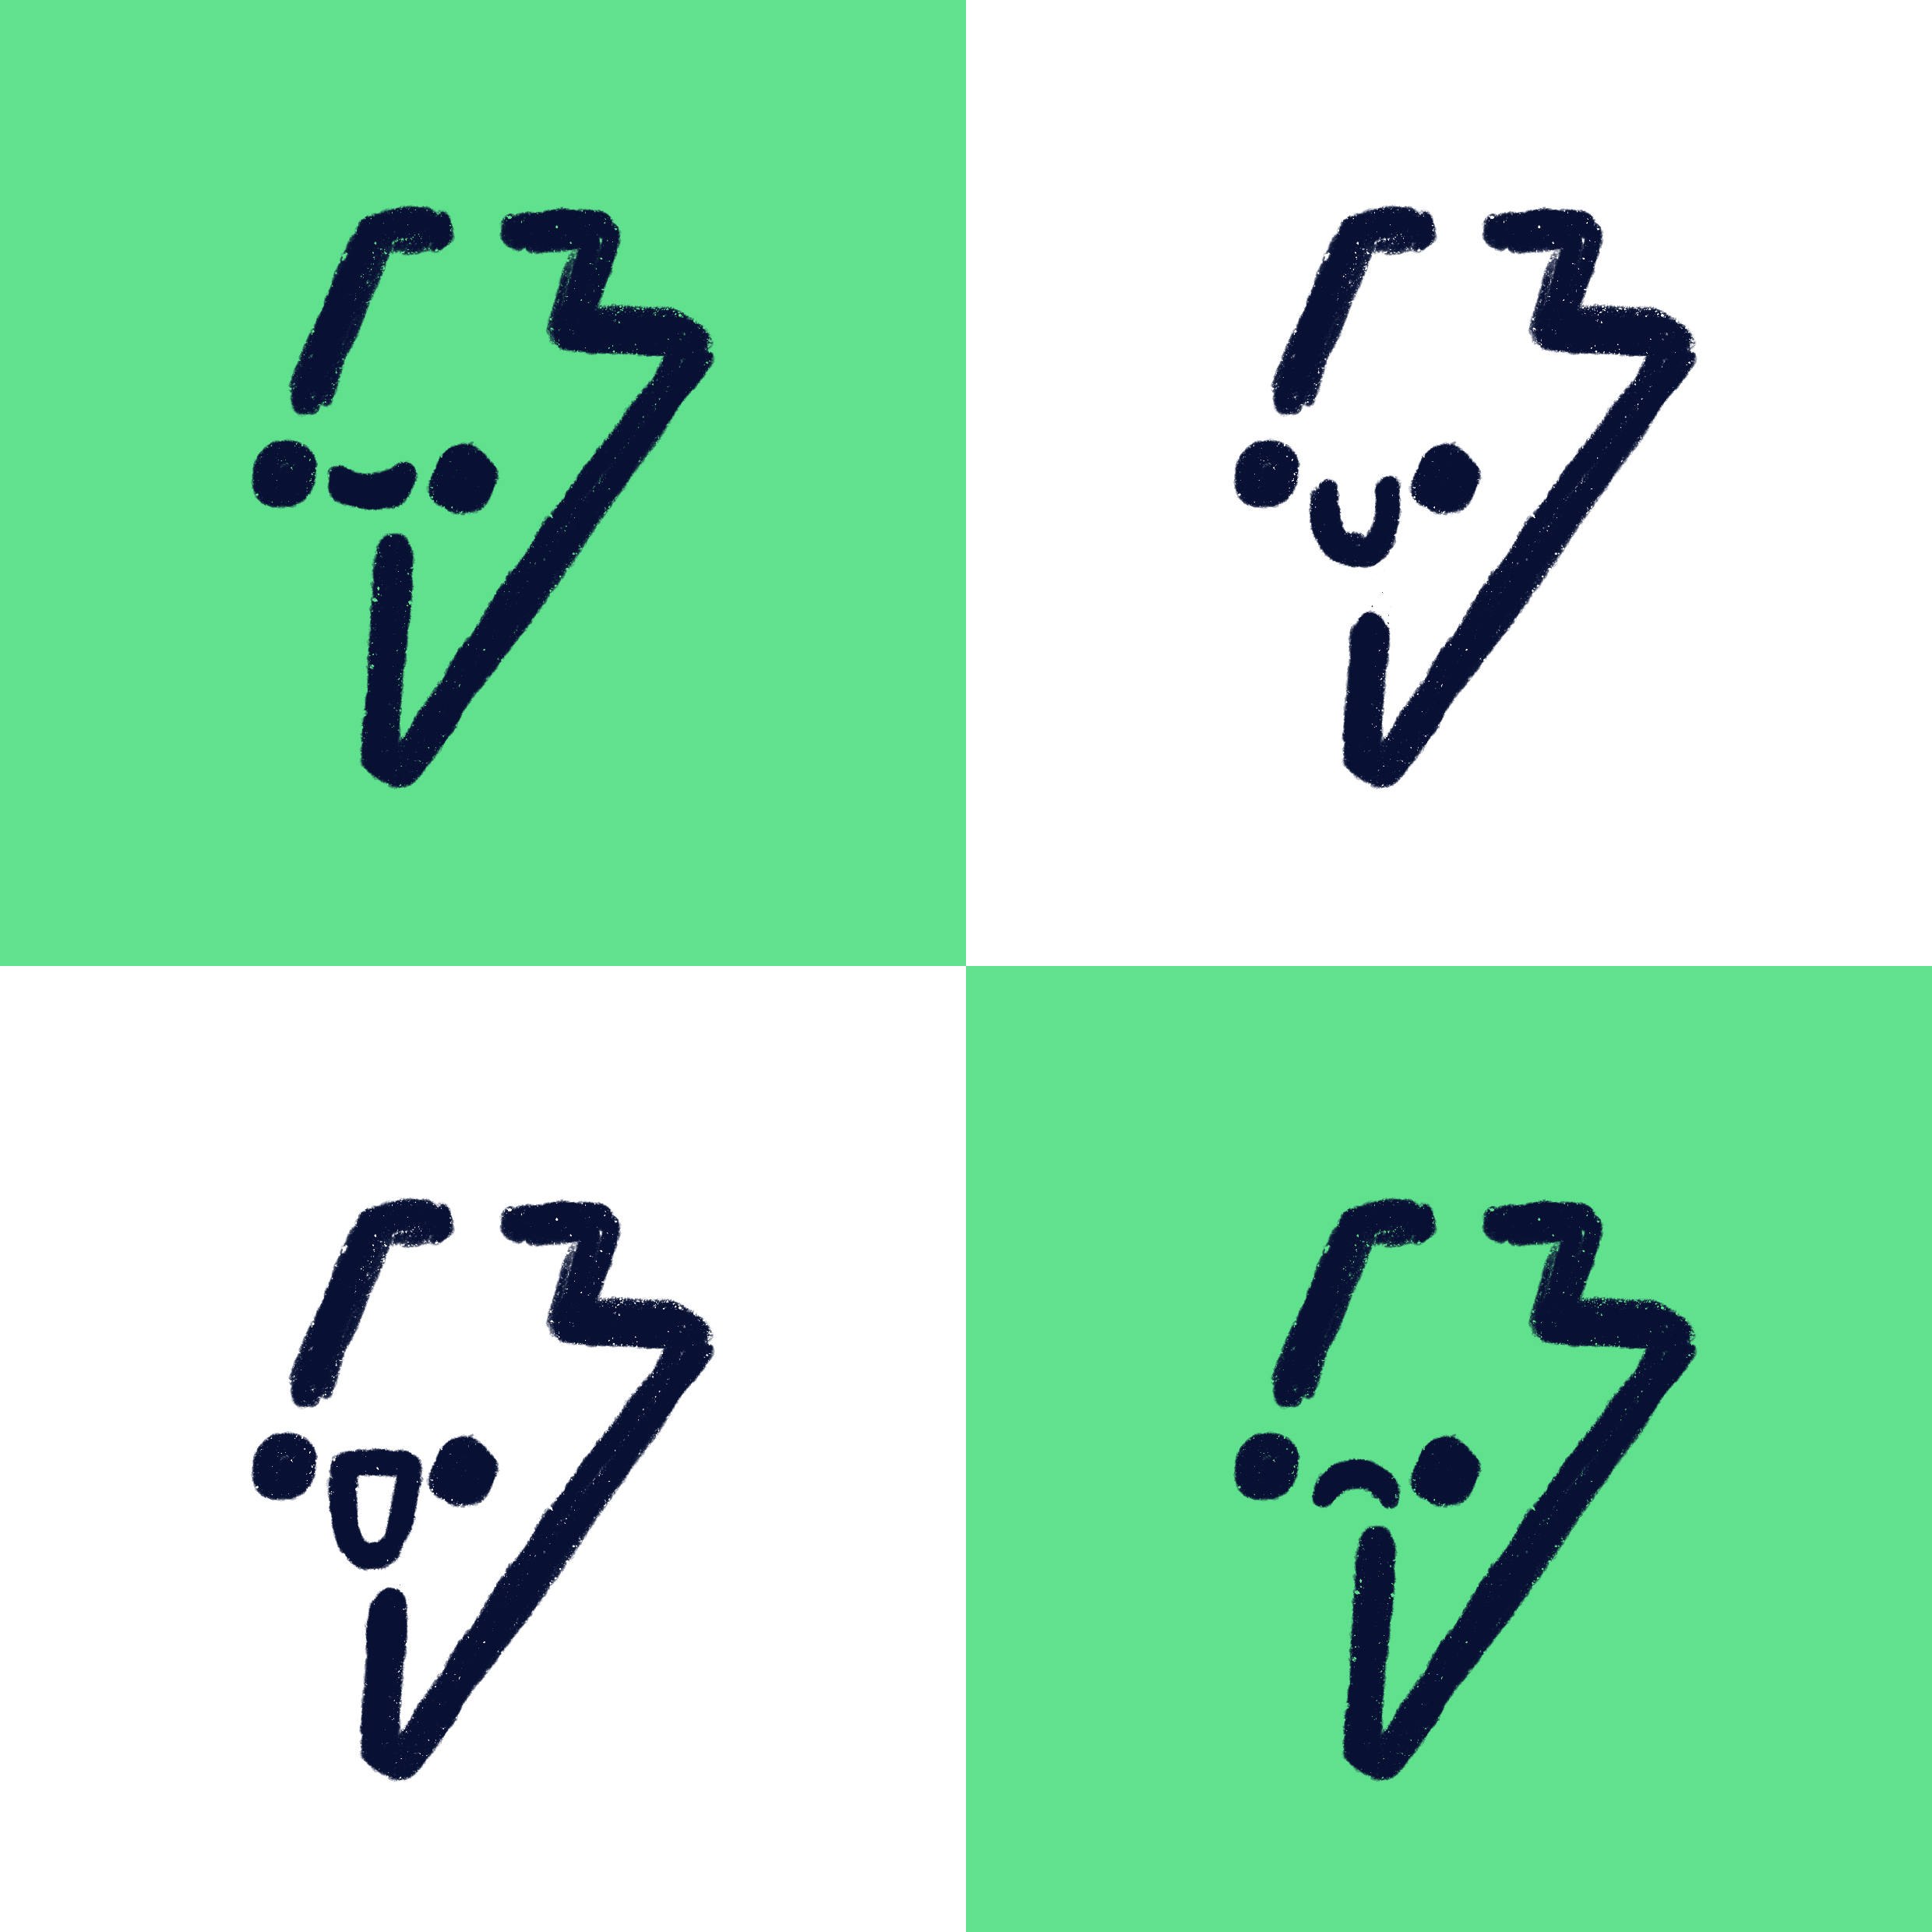 Different ScooterStop logo character expressions